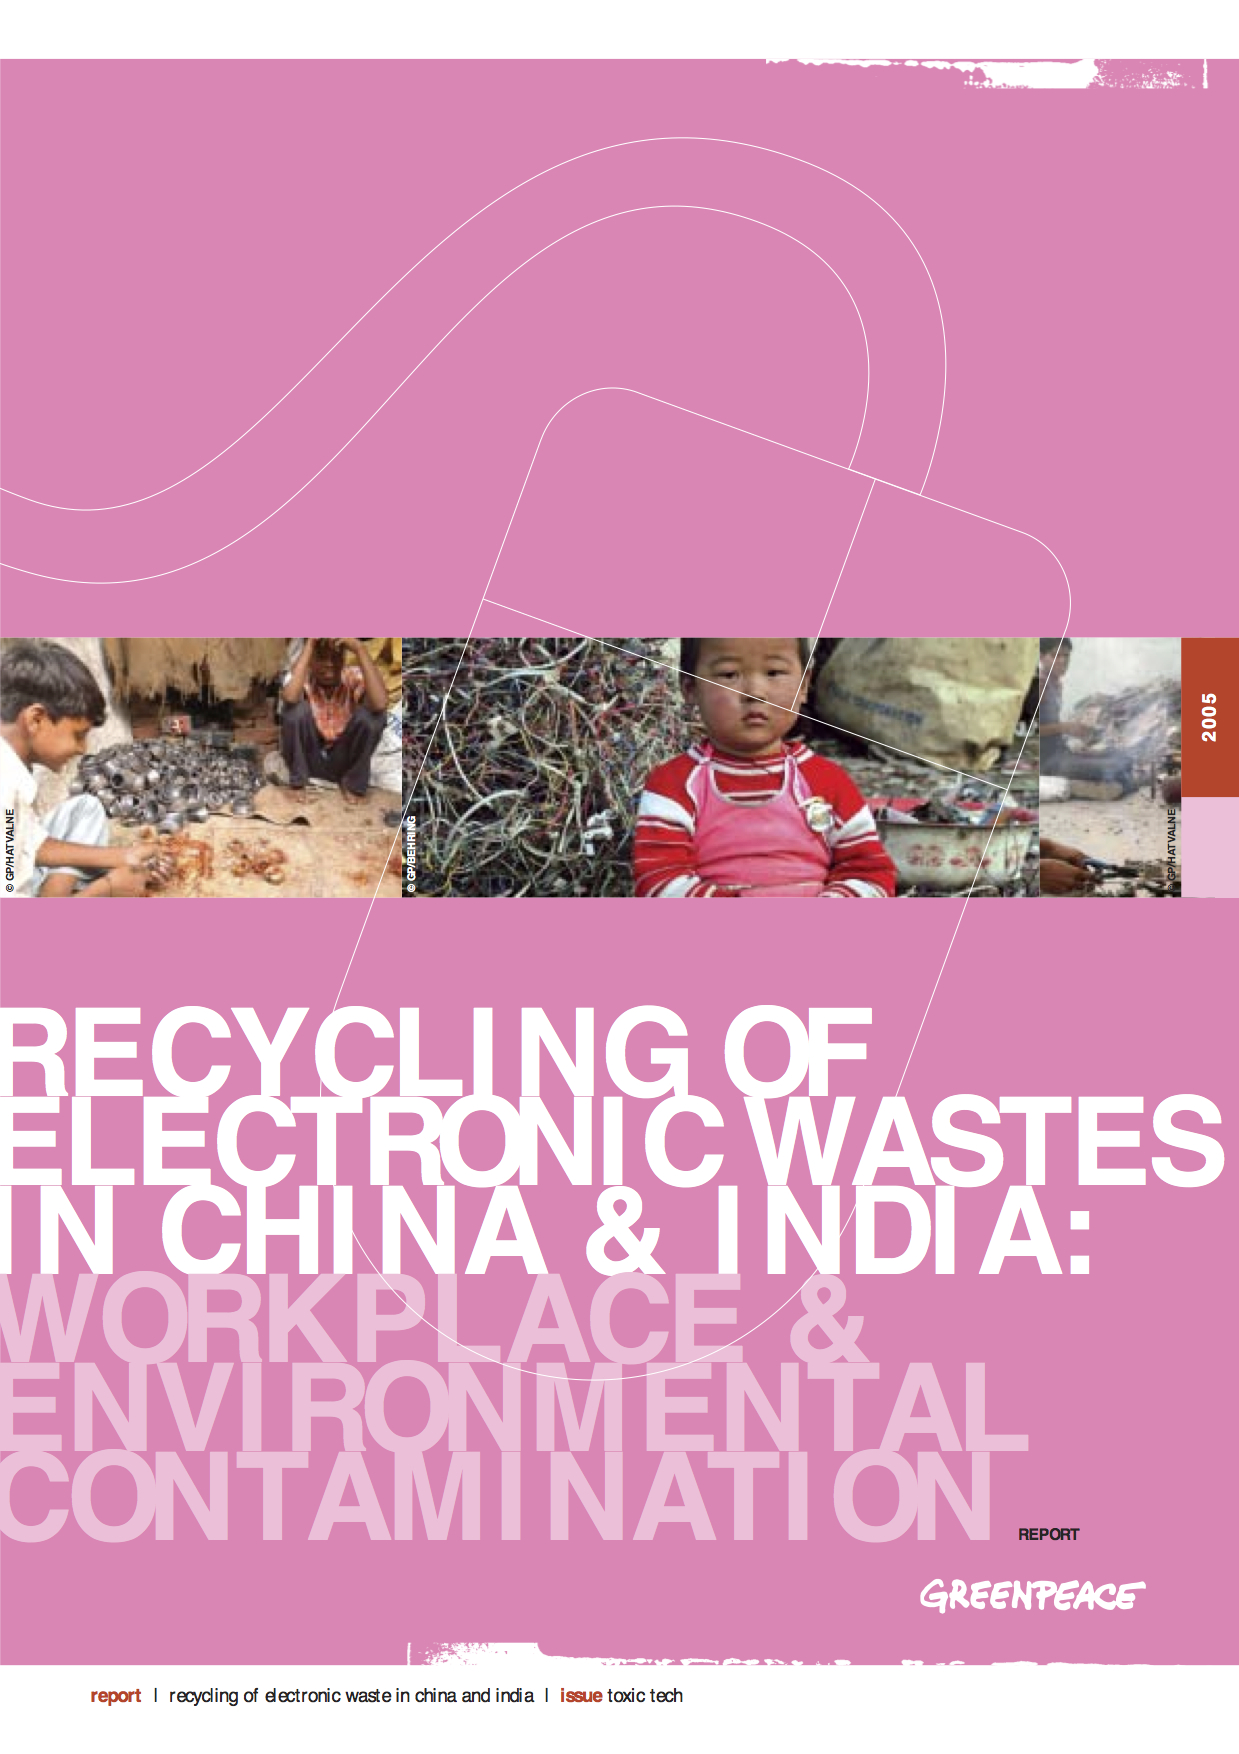 RECYCLING OF ELECTRONIC WASTES IN CHINA & INDIA